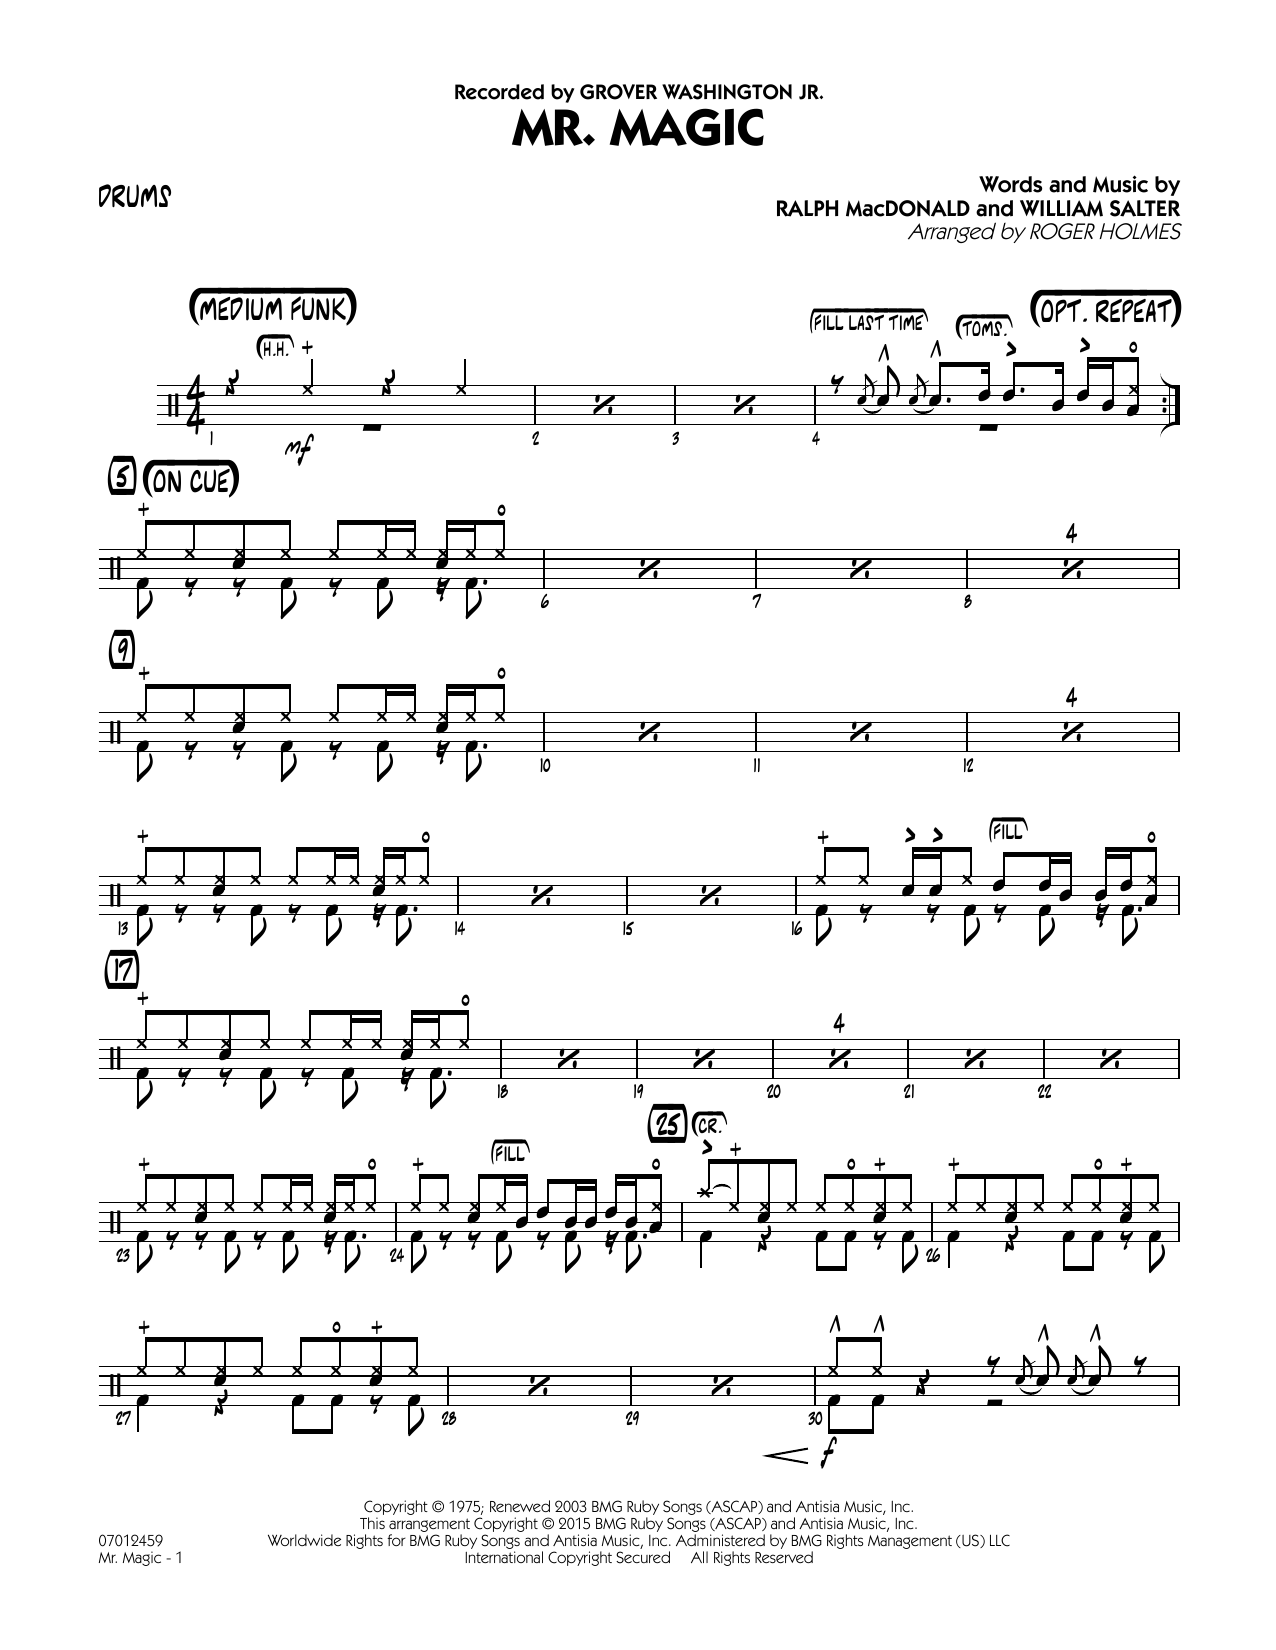 Roger Holmes Mister Magic (Mr. Magic) - Drums sheet music notes and chords. Download Printable PDF.